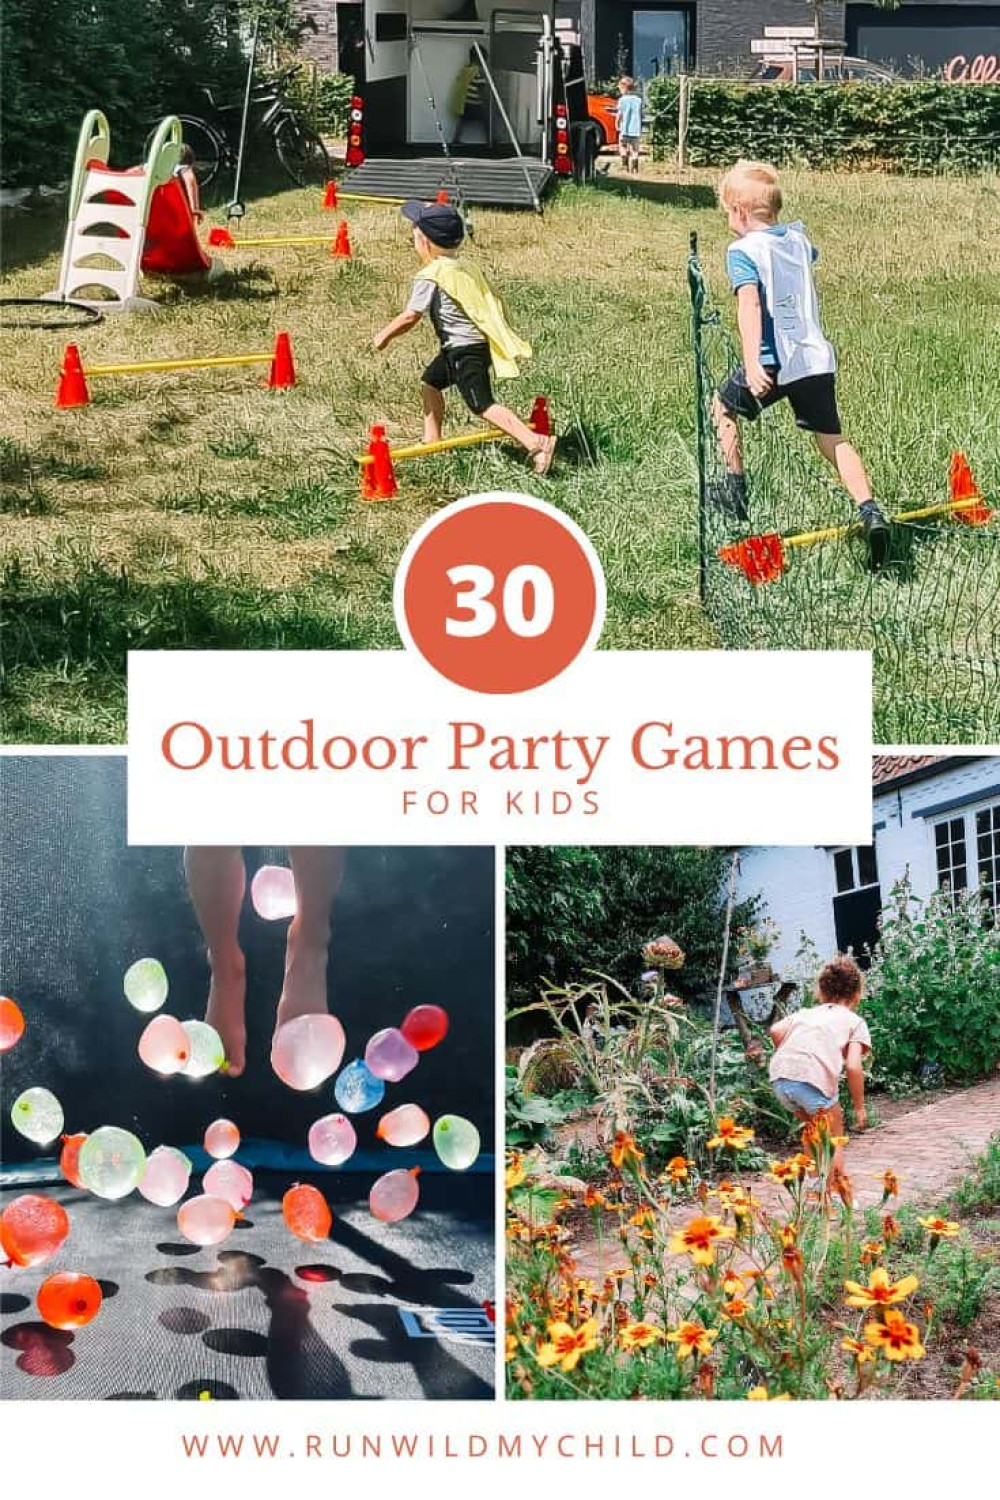 + Outdoor Party Games for Kids • RUN WILD MY CHILD